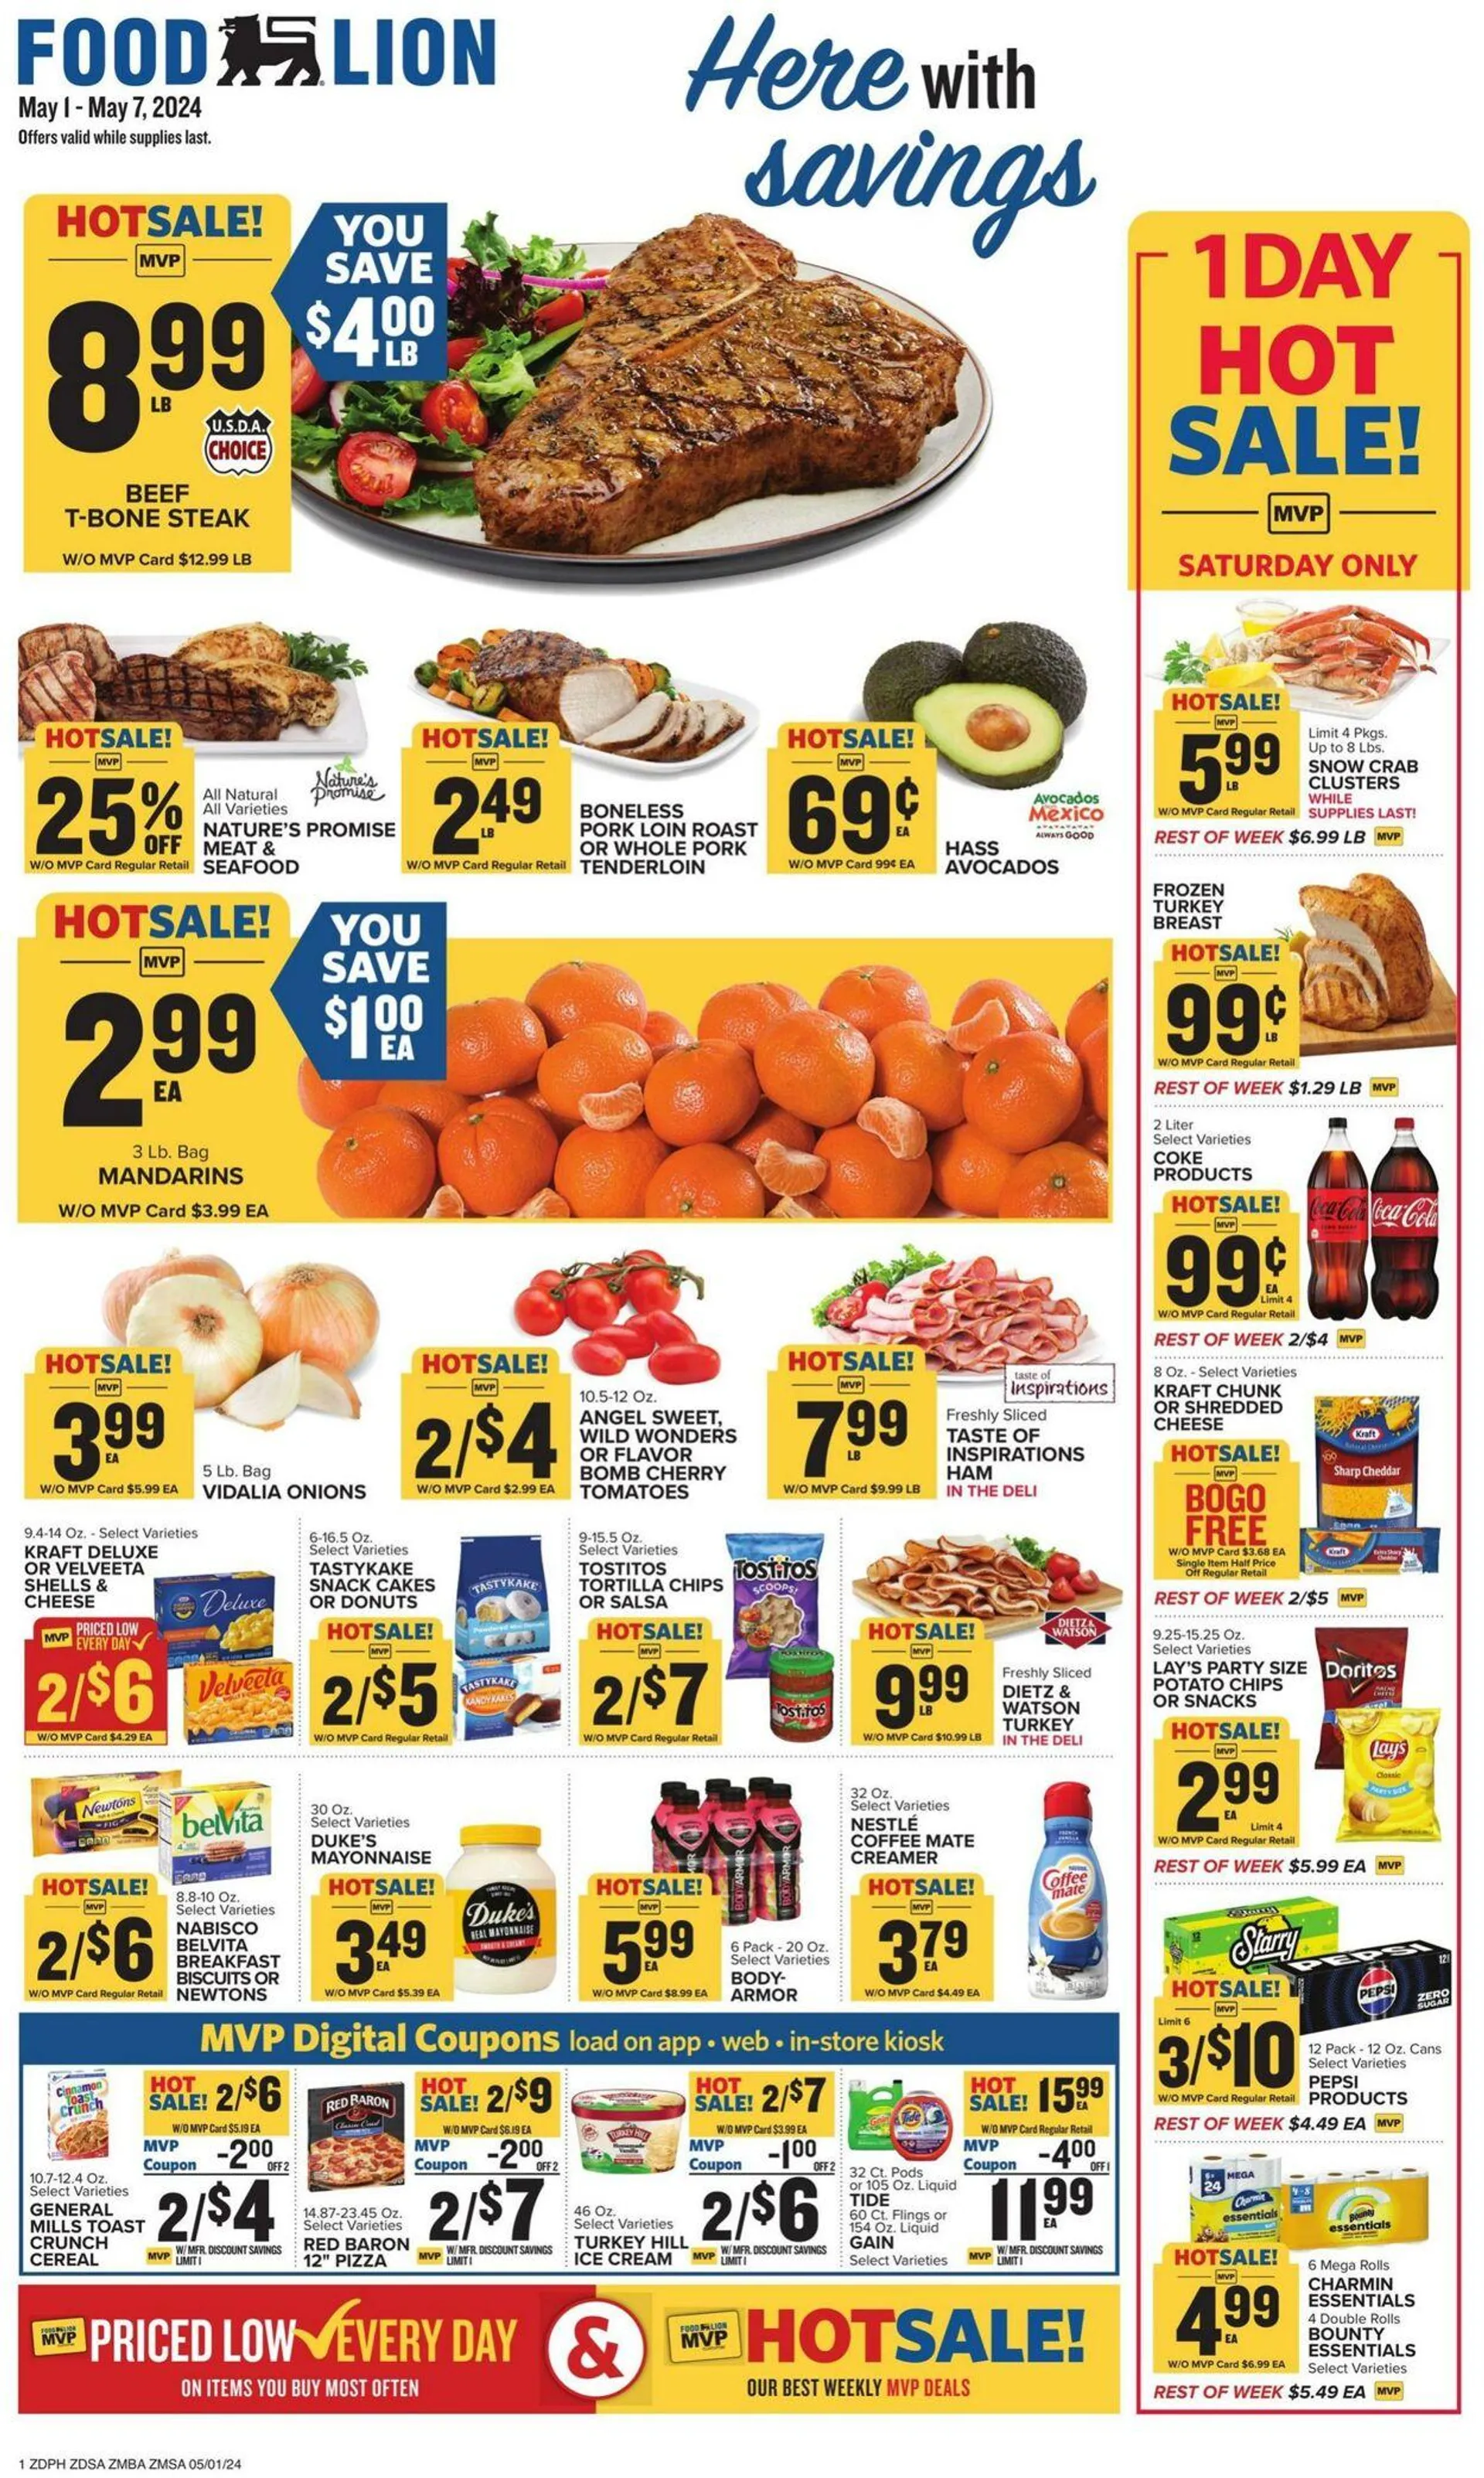 Food Lion Current weekly ad - 1